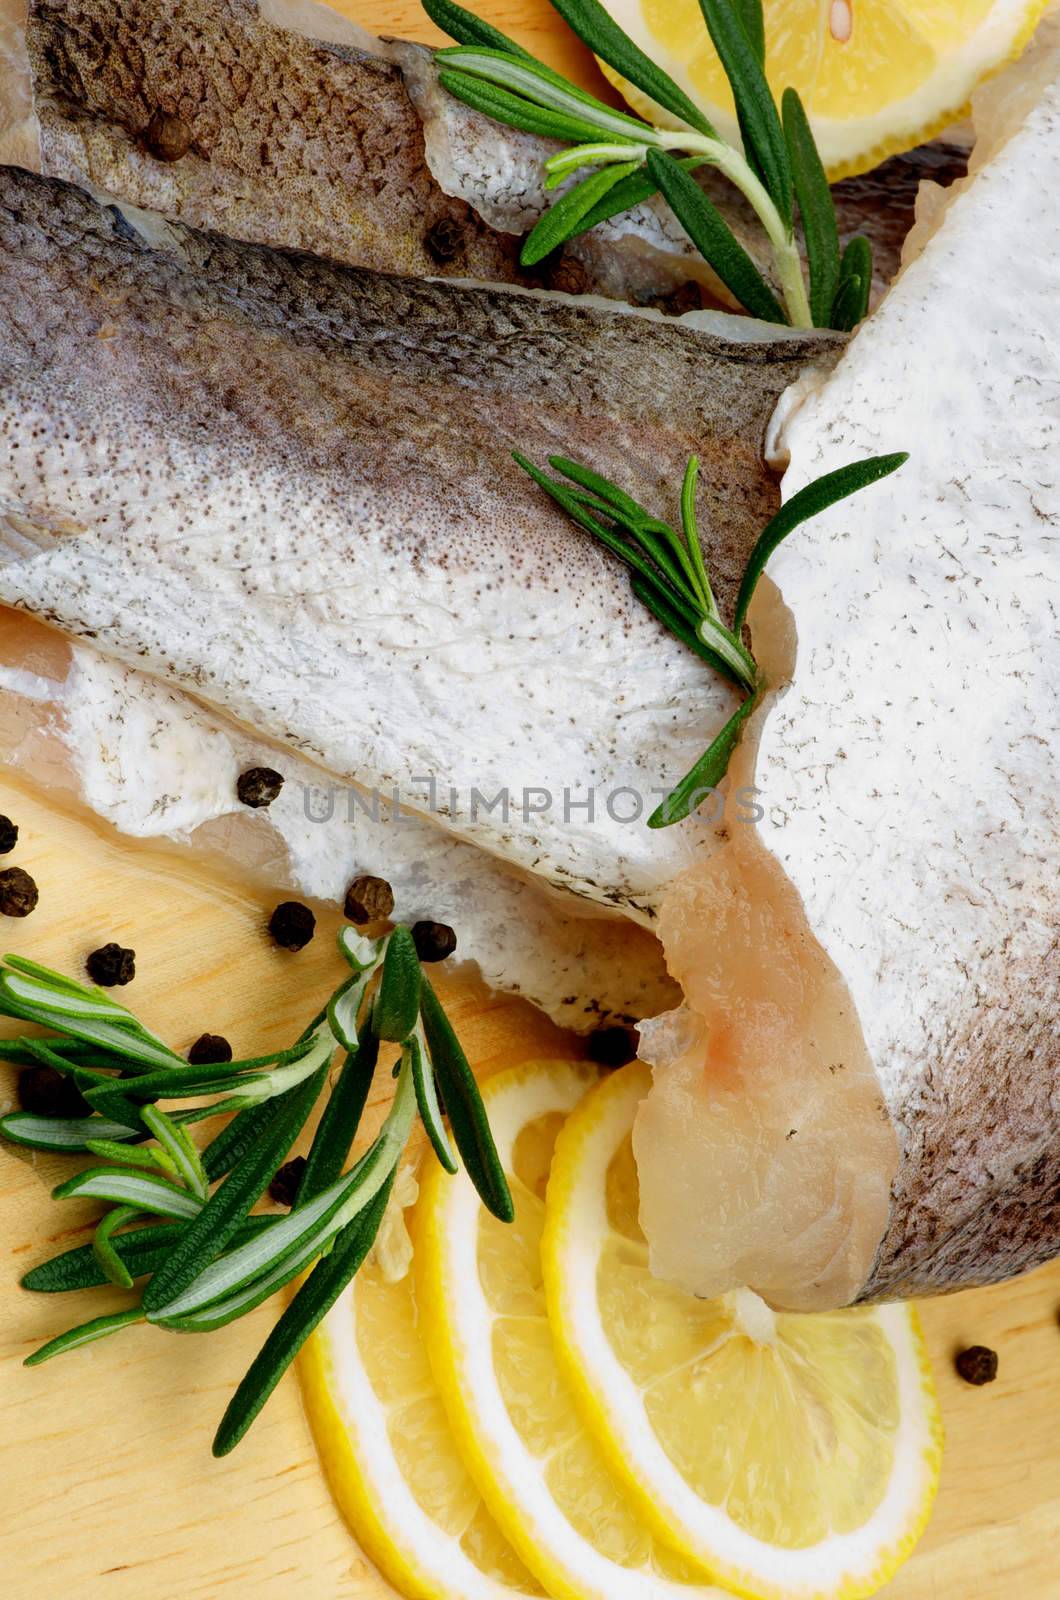 Raw Fillet of Fish Hake with Lemon, Rosemary and Black Peppercorn closeup on Wooden Cutting Board